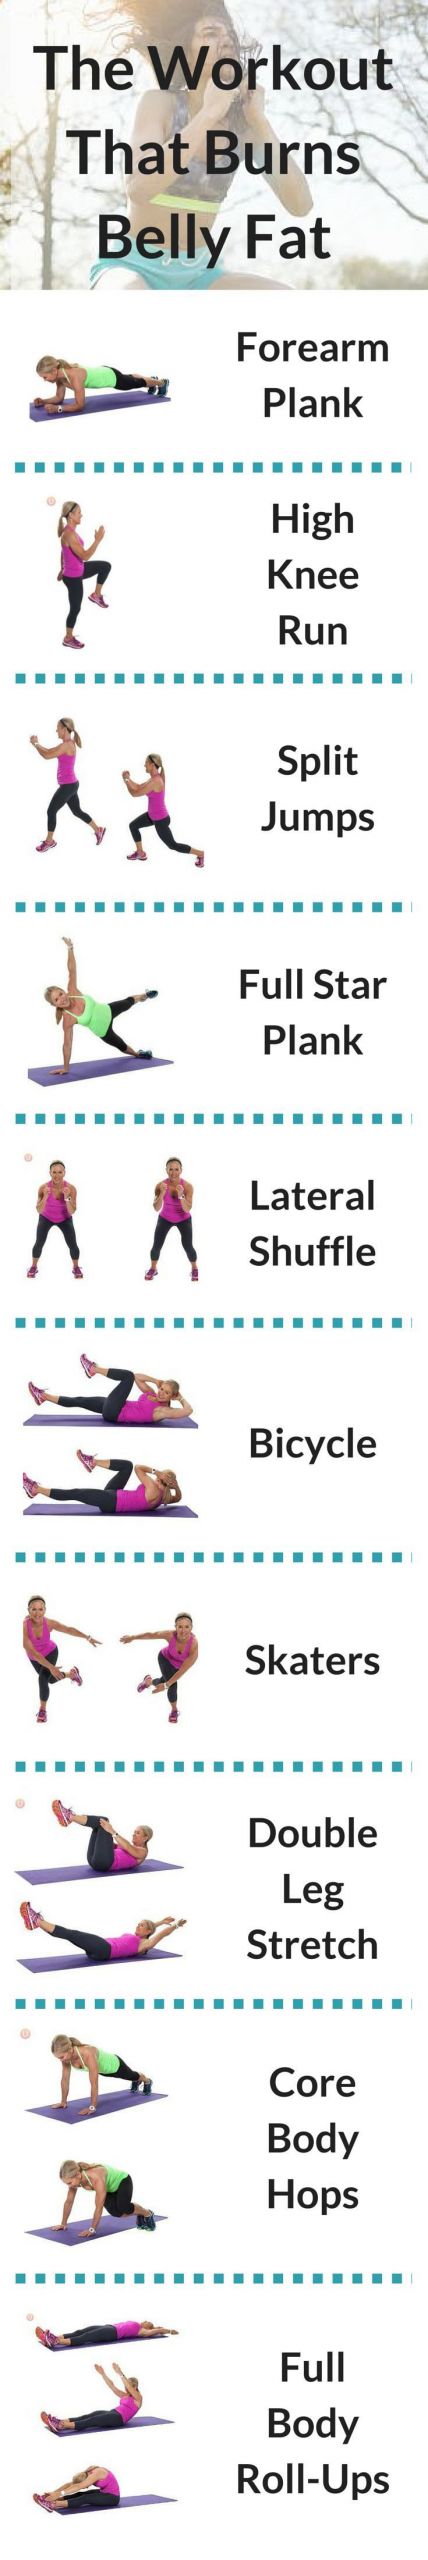 Burn Belly Fat Workout
 Pin on Health Fitness tips